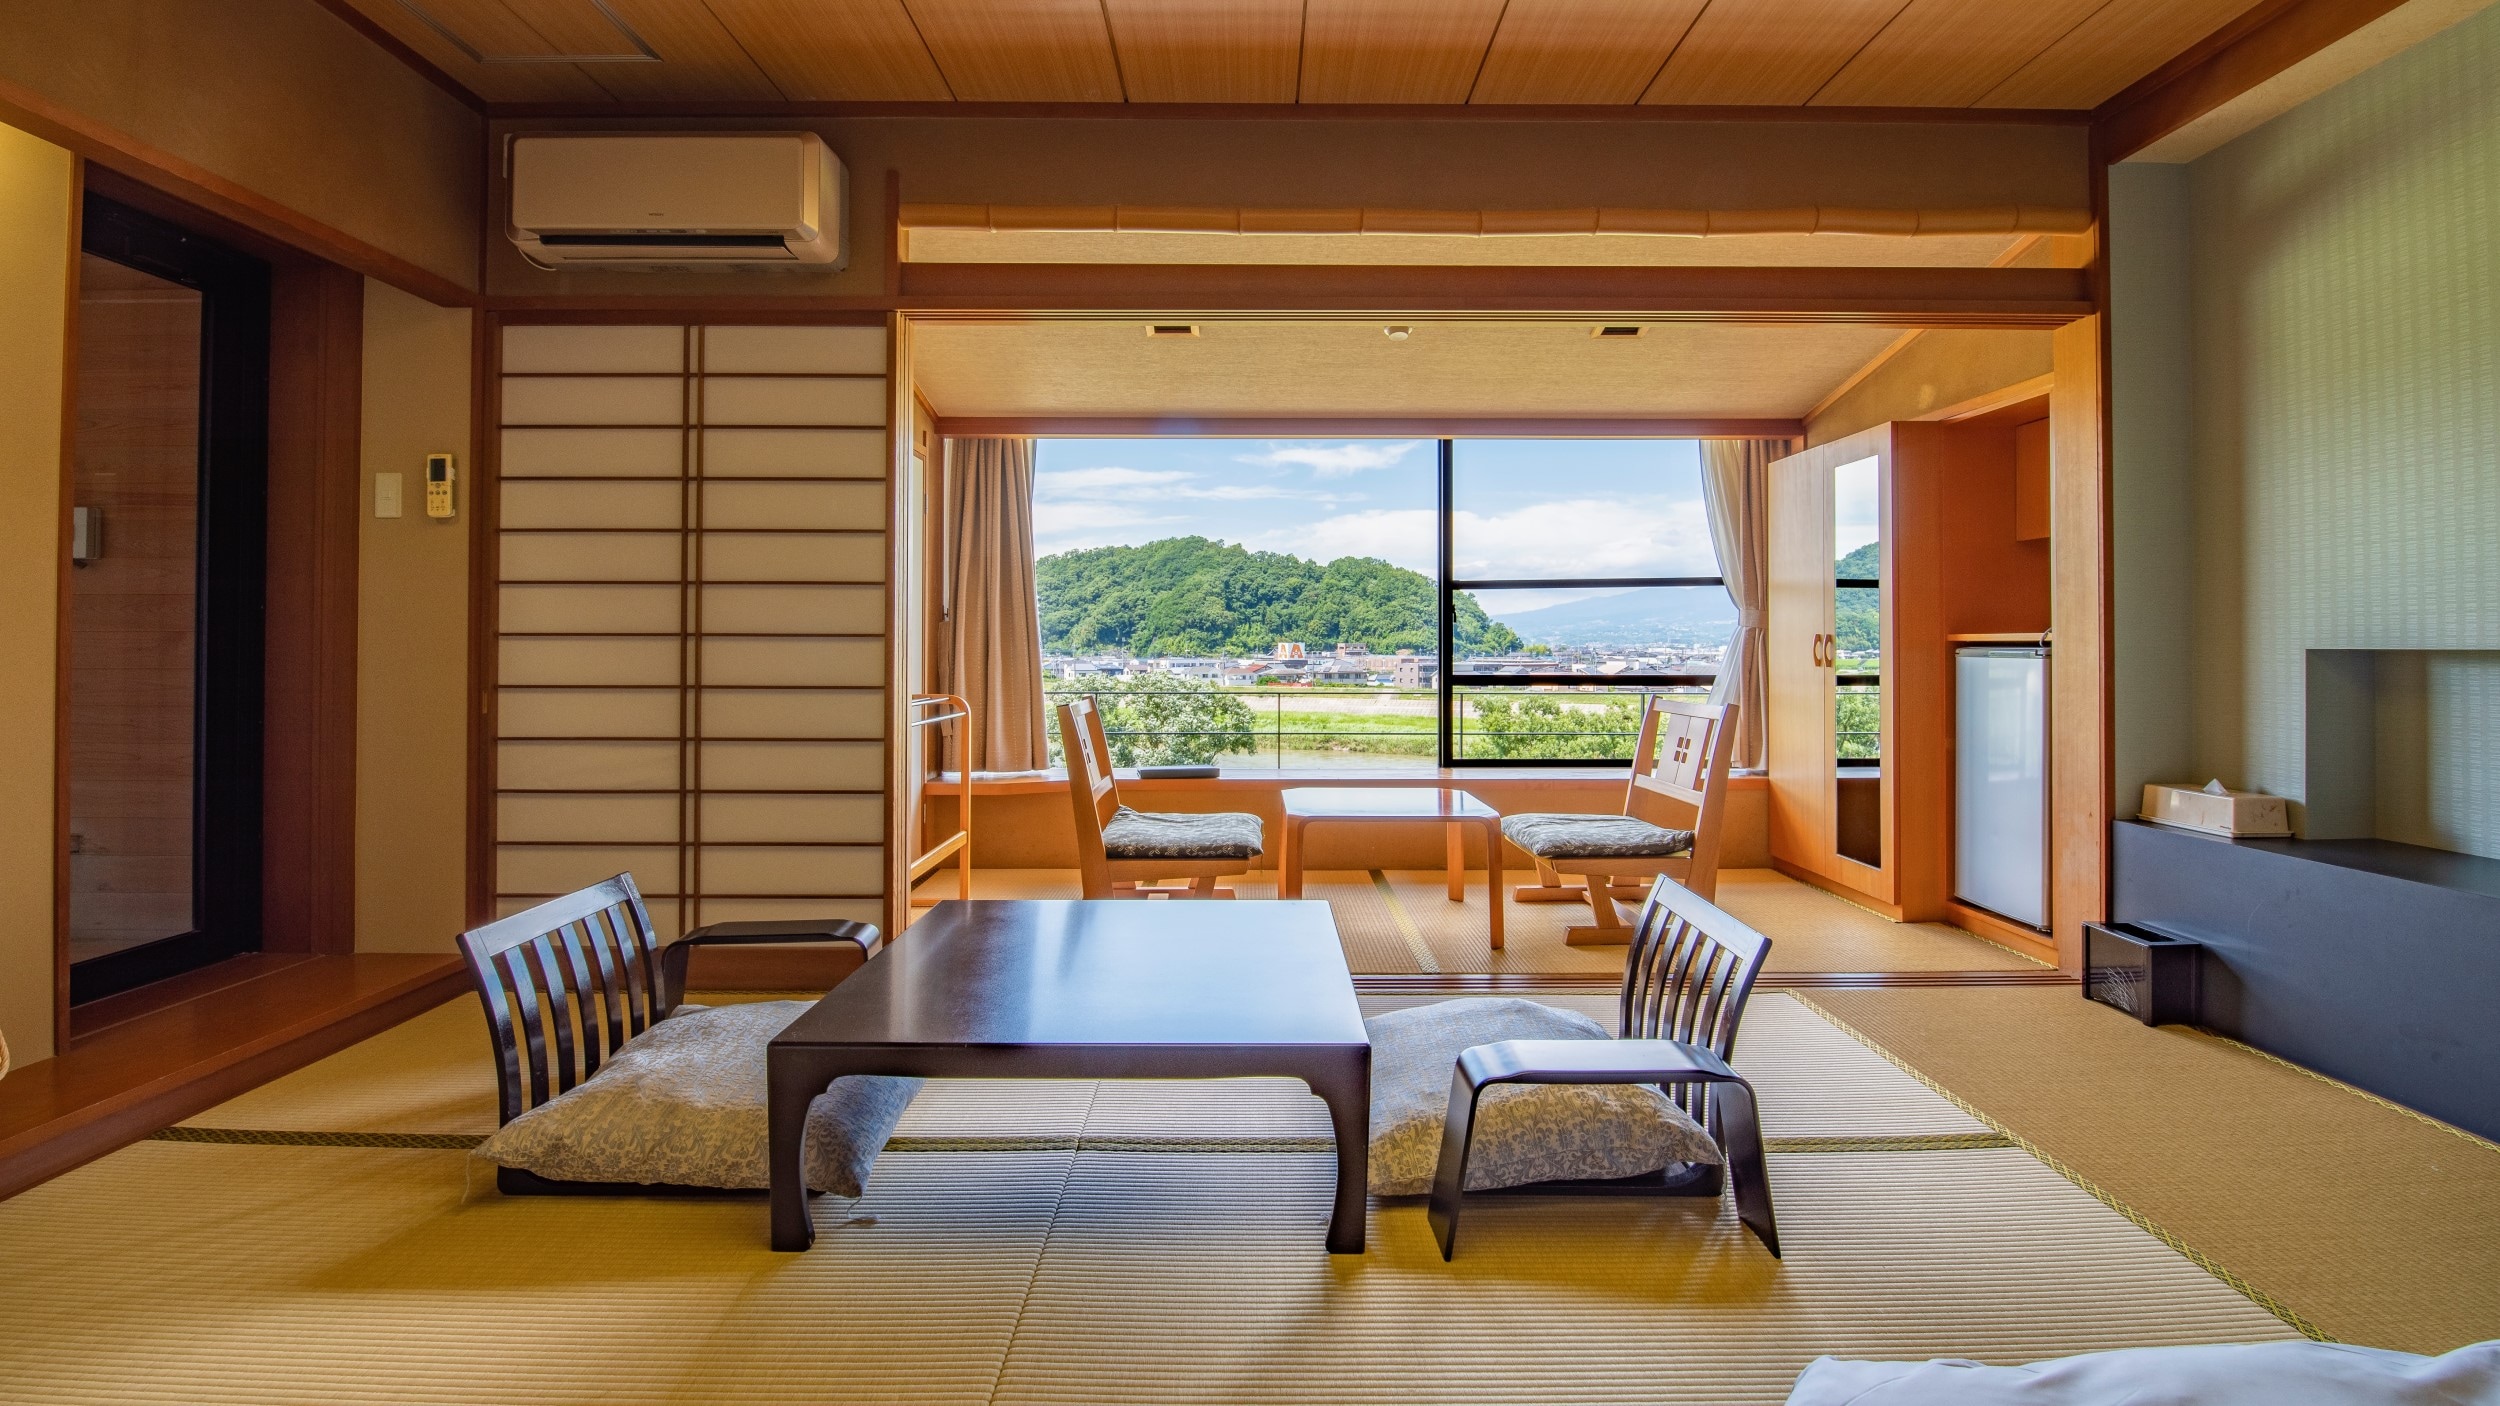 Standard Japanese-style room with a view of Mt. Fuji and the mountains from the window